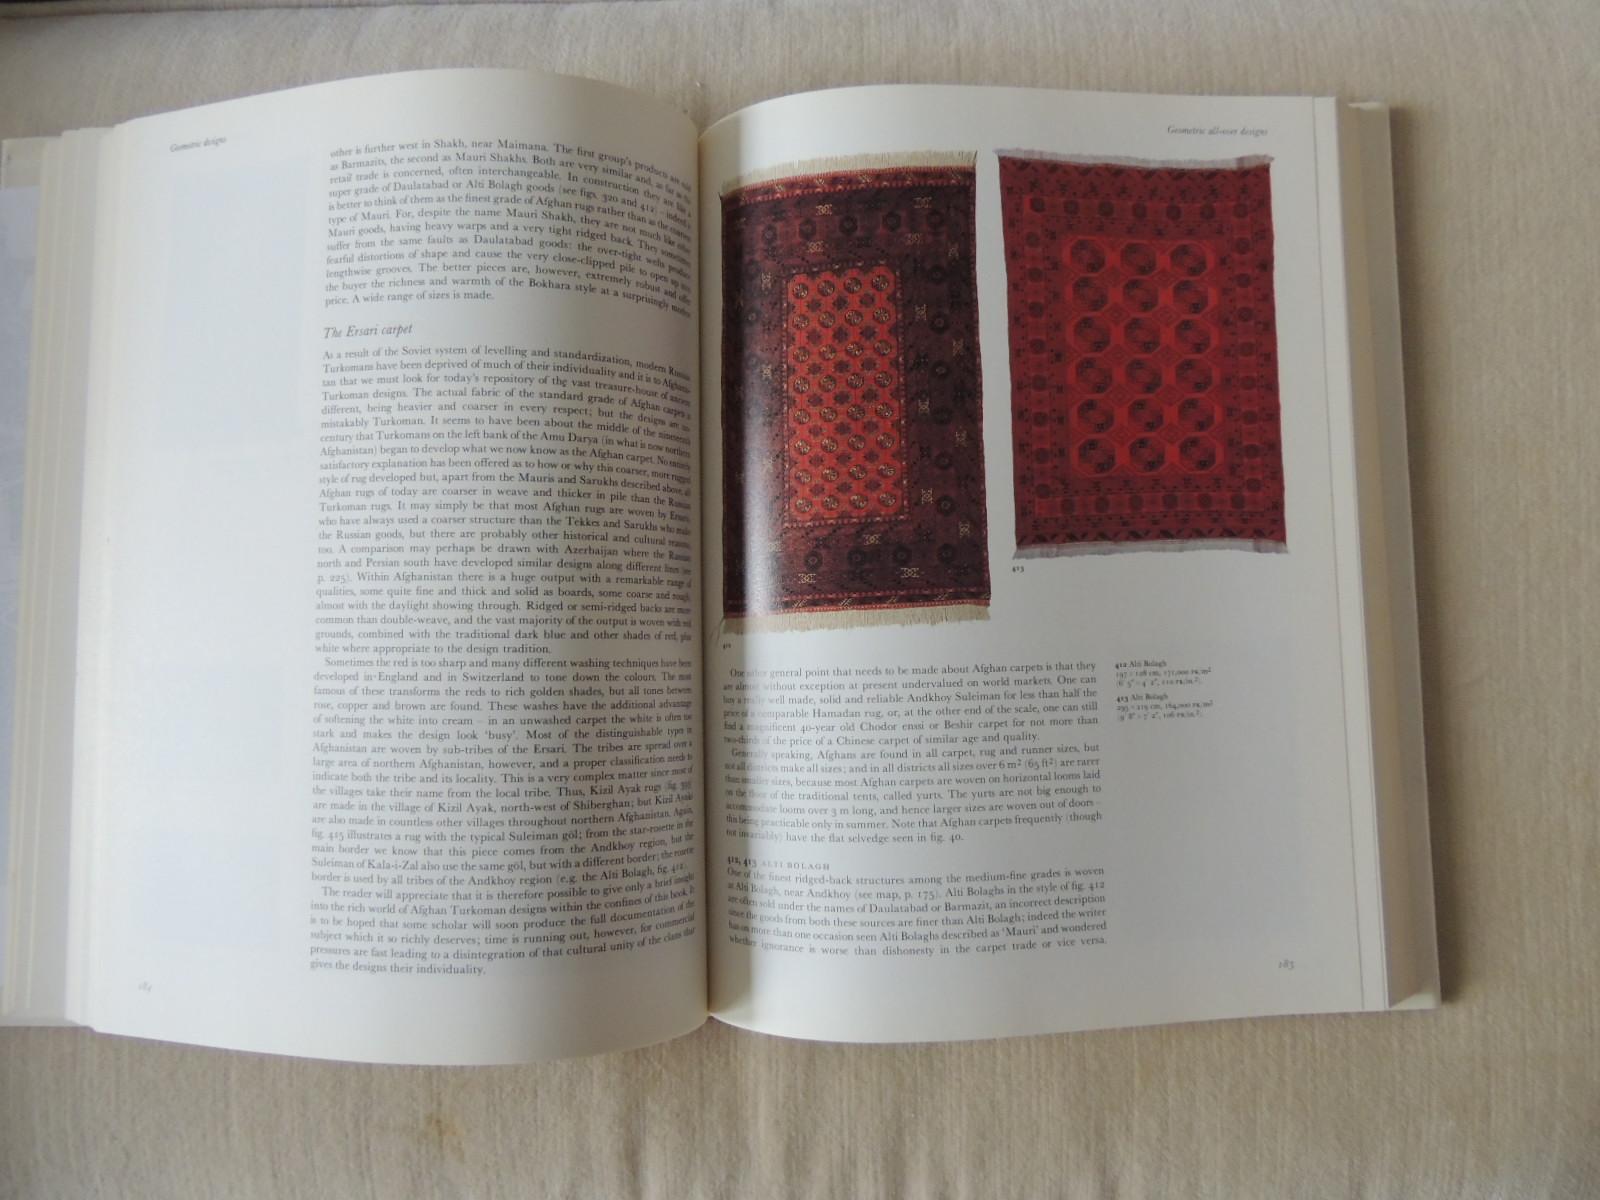 American The Oriental Carpet Hardcover Coffee Table Book by P.R.J. Ford